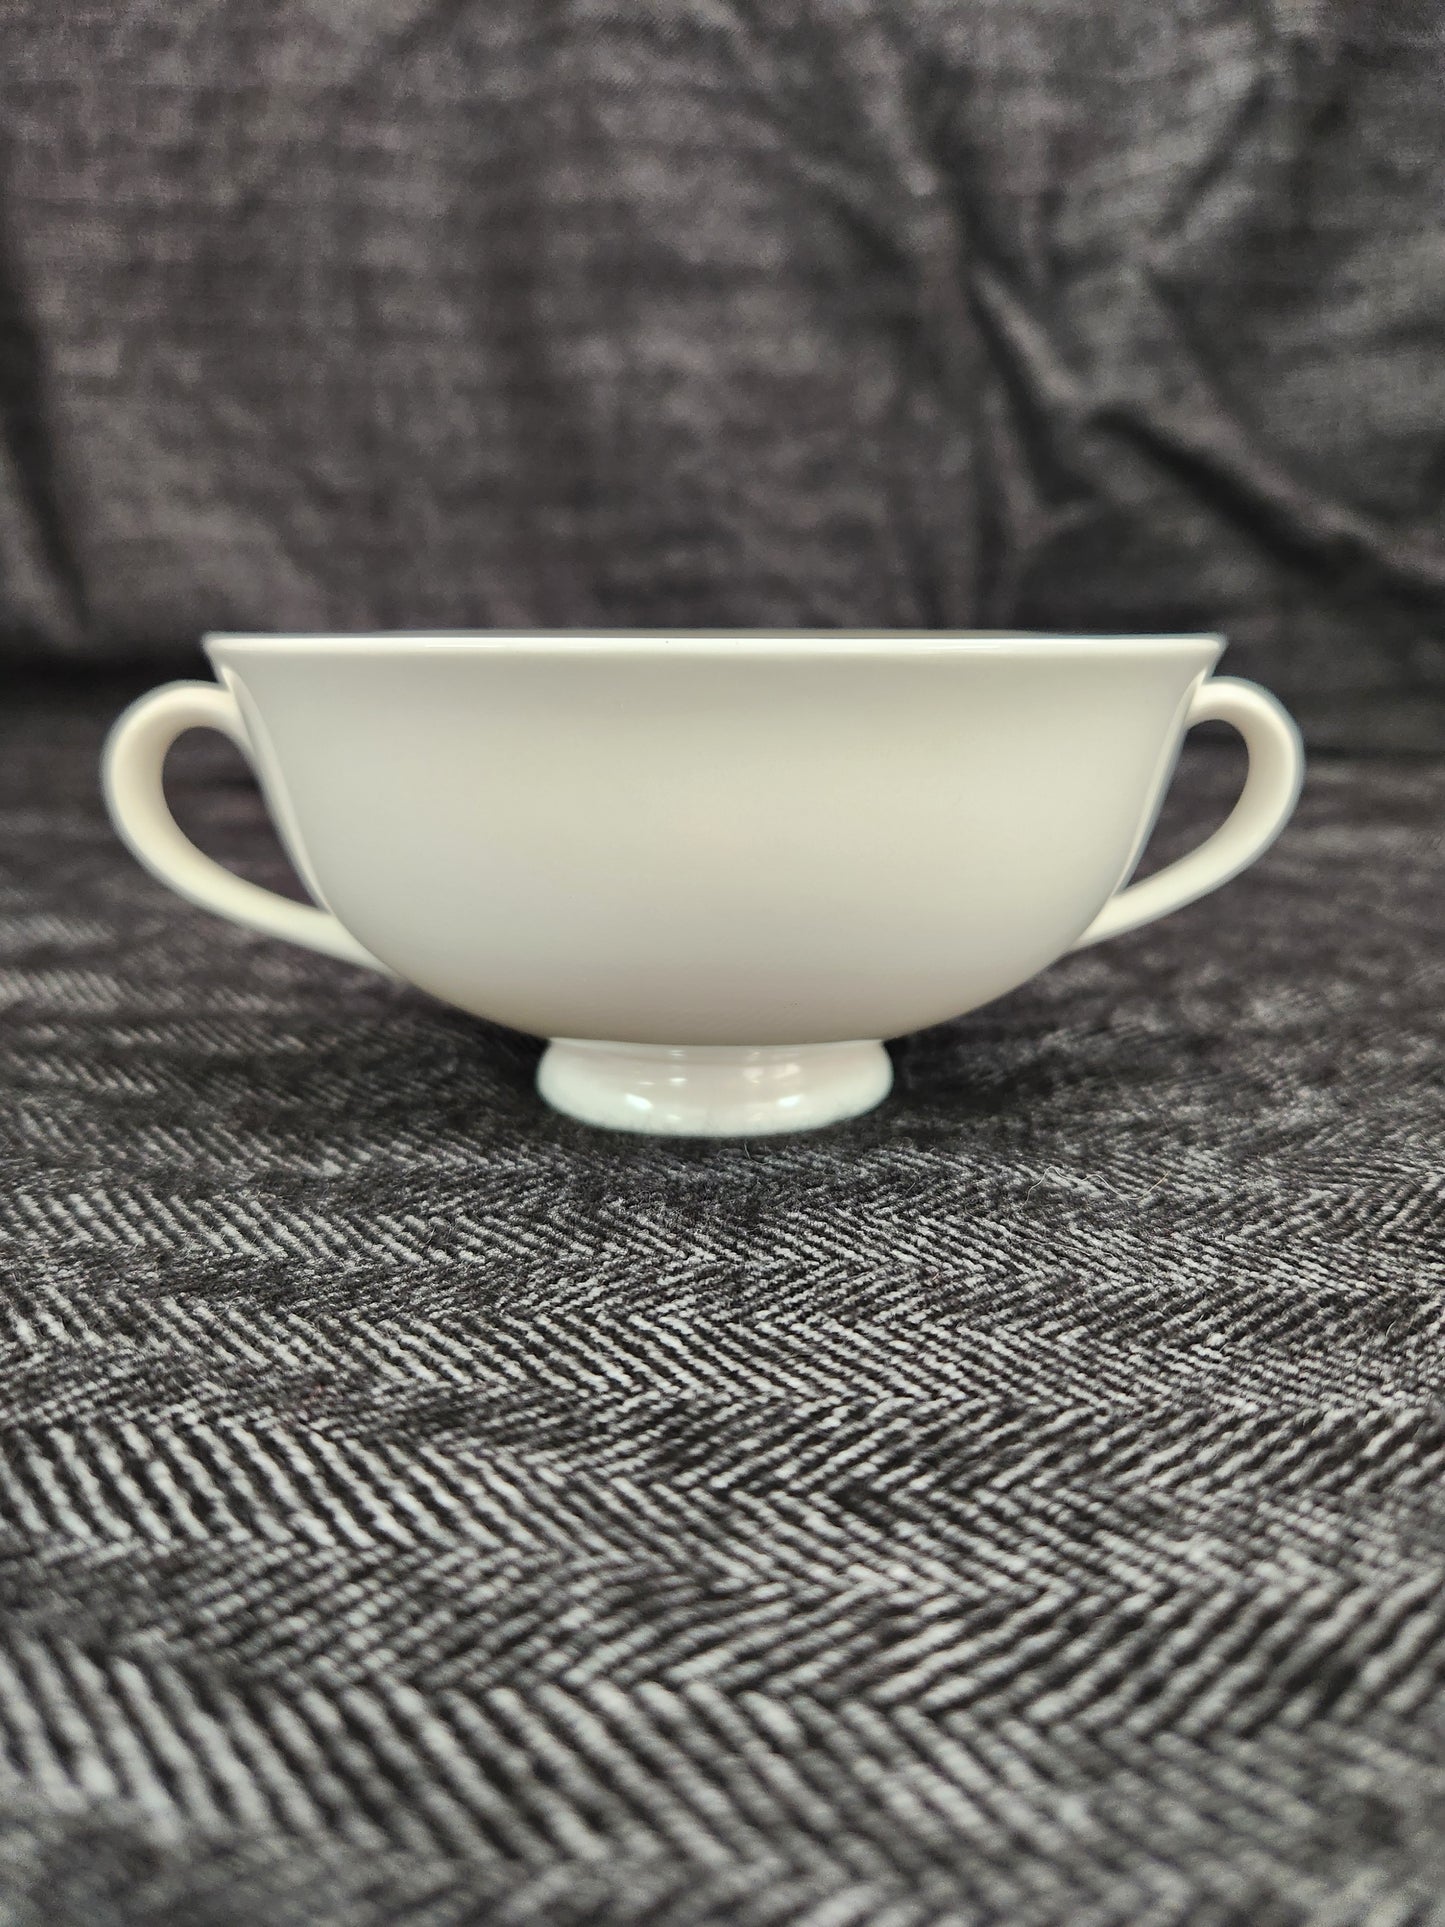 Concord Platinum Footed Cream Soup Bowl by Royal Doulton - #H5048